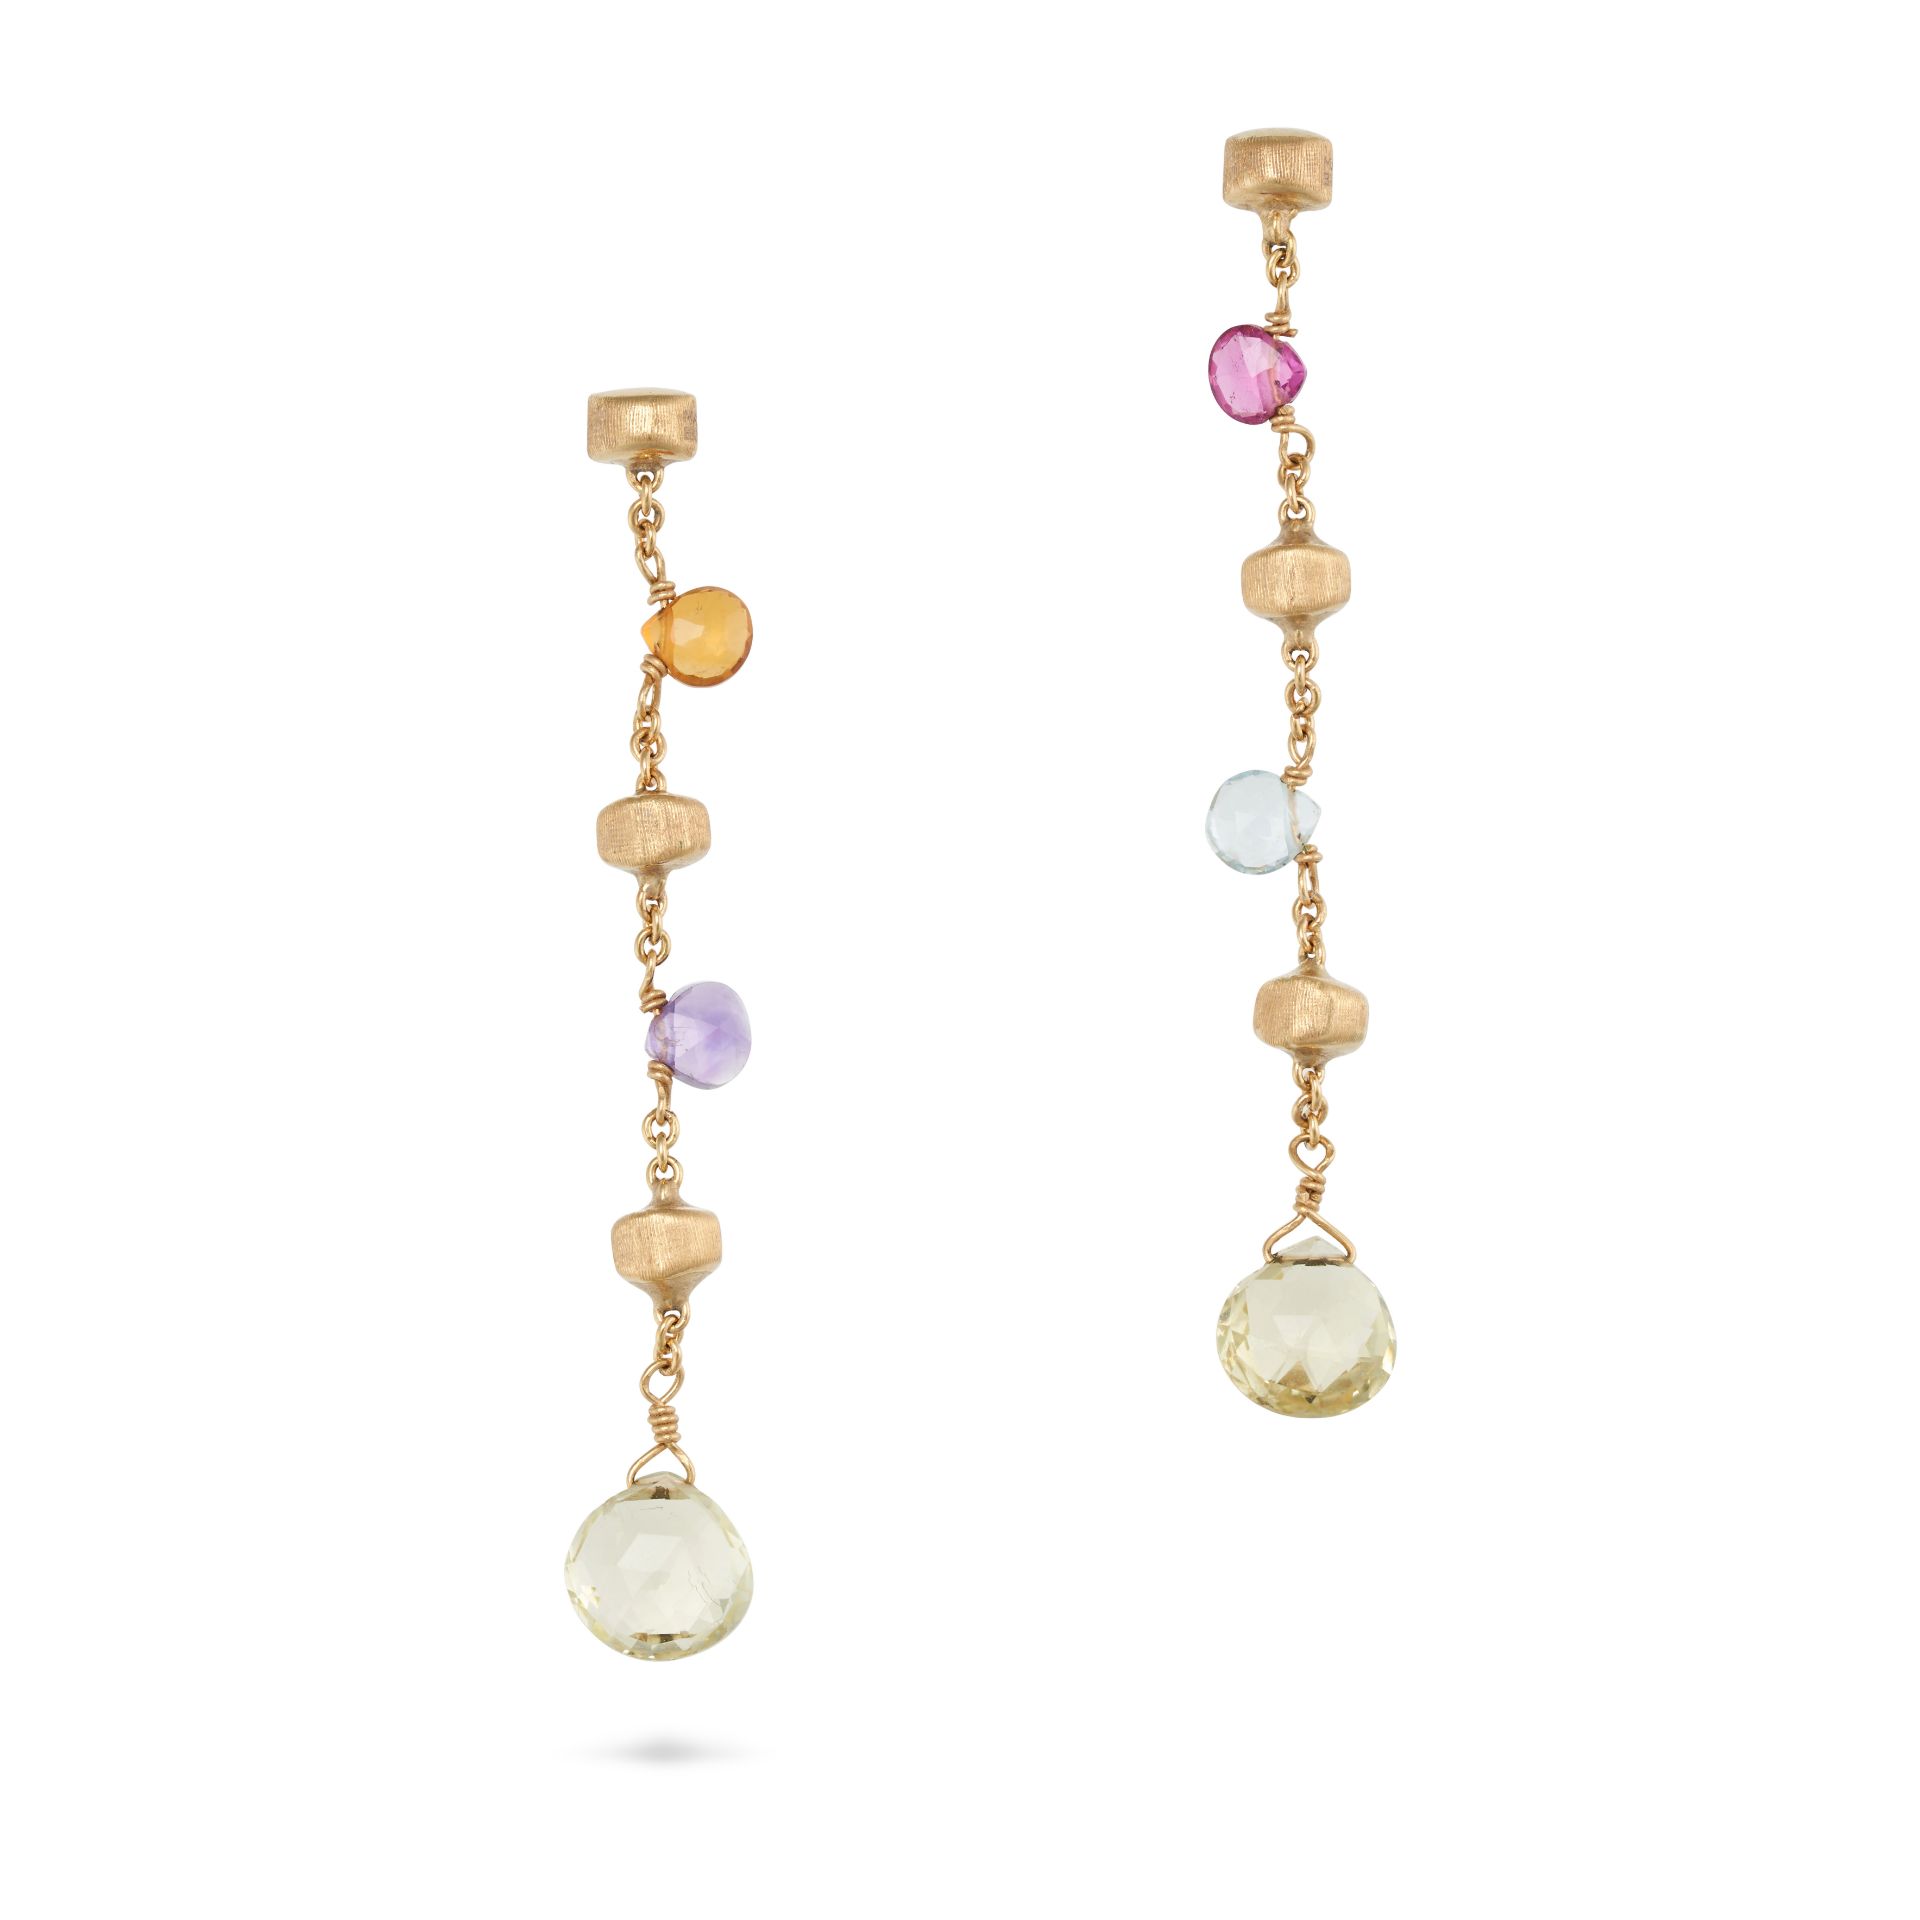 MARCO BICEGO, A PAIR OF PARADISE EARRINGS in 18ct yellow gold, each comprising a chain set variou...